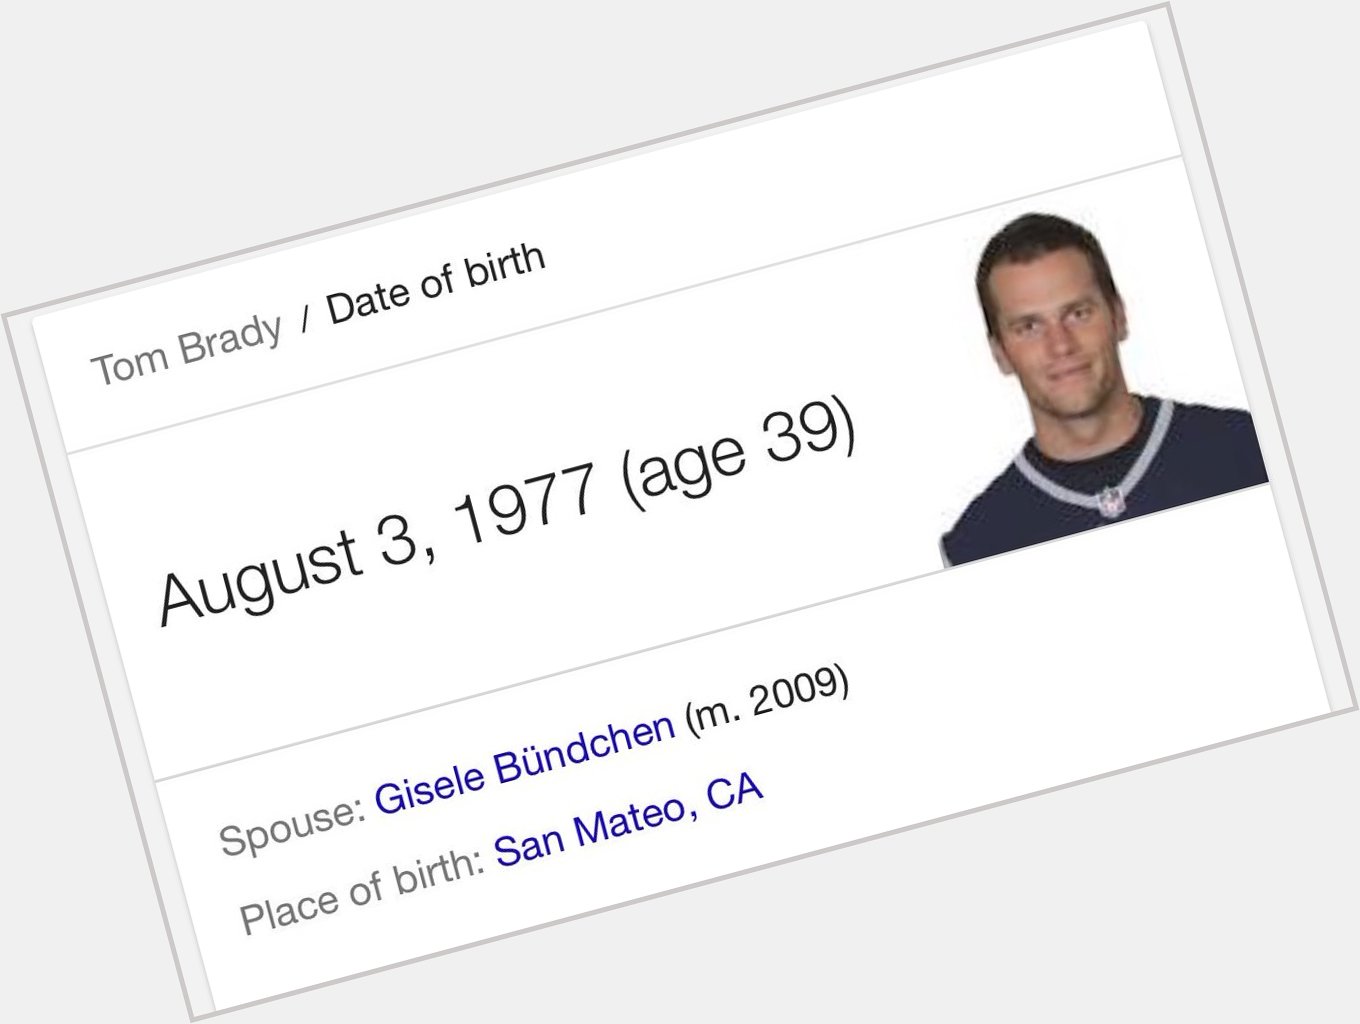 Yay im excited for the people to wish tom brady happy birthday knowing that there is no chance he will see it 